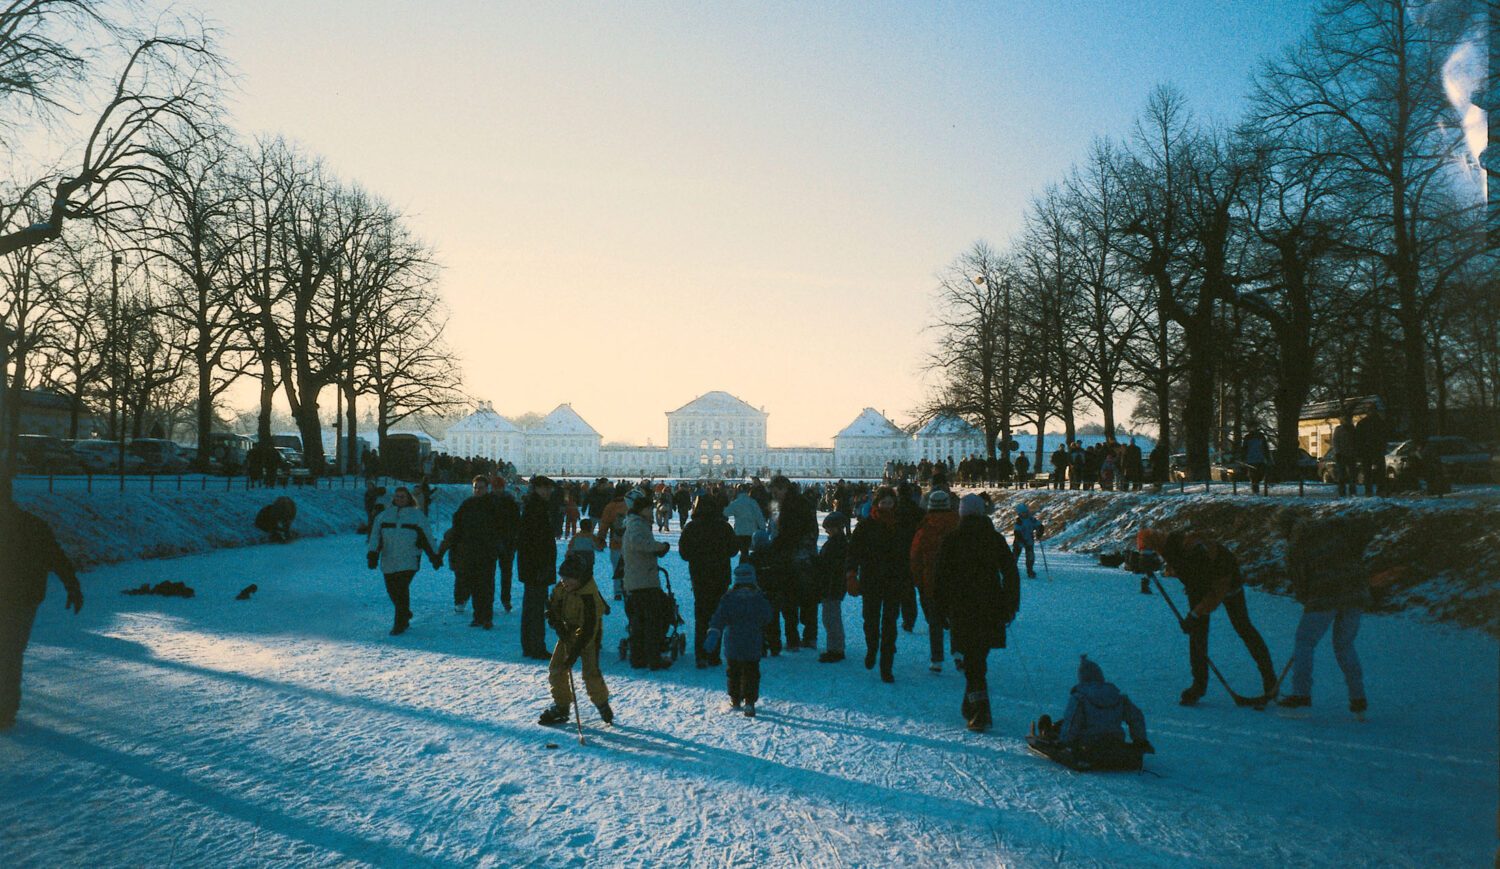 Munich's parks transform into ice skating rinks or snow-white walkways in winter © erlebe.bayern